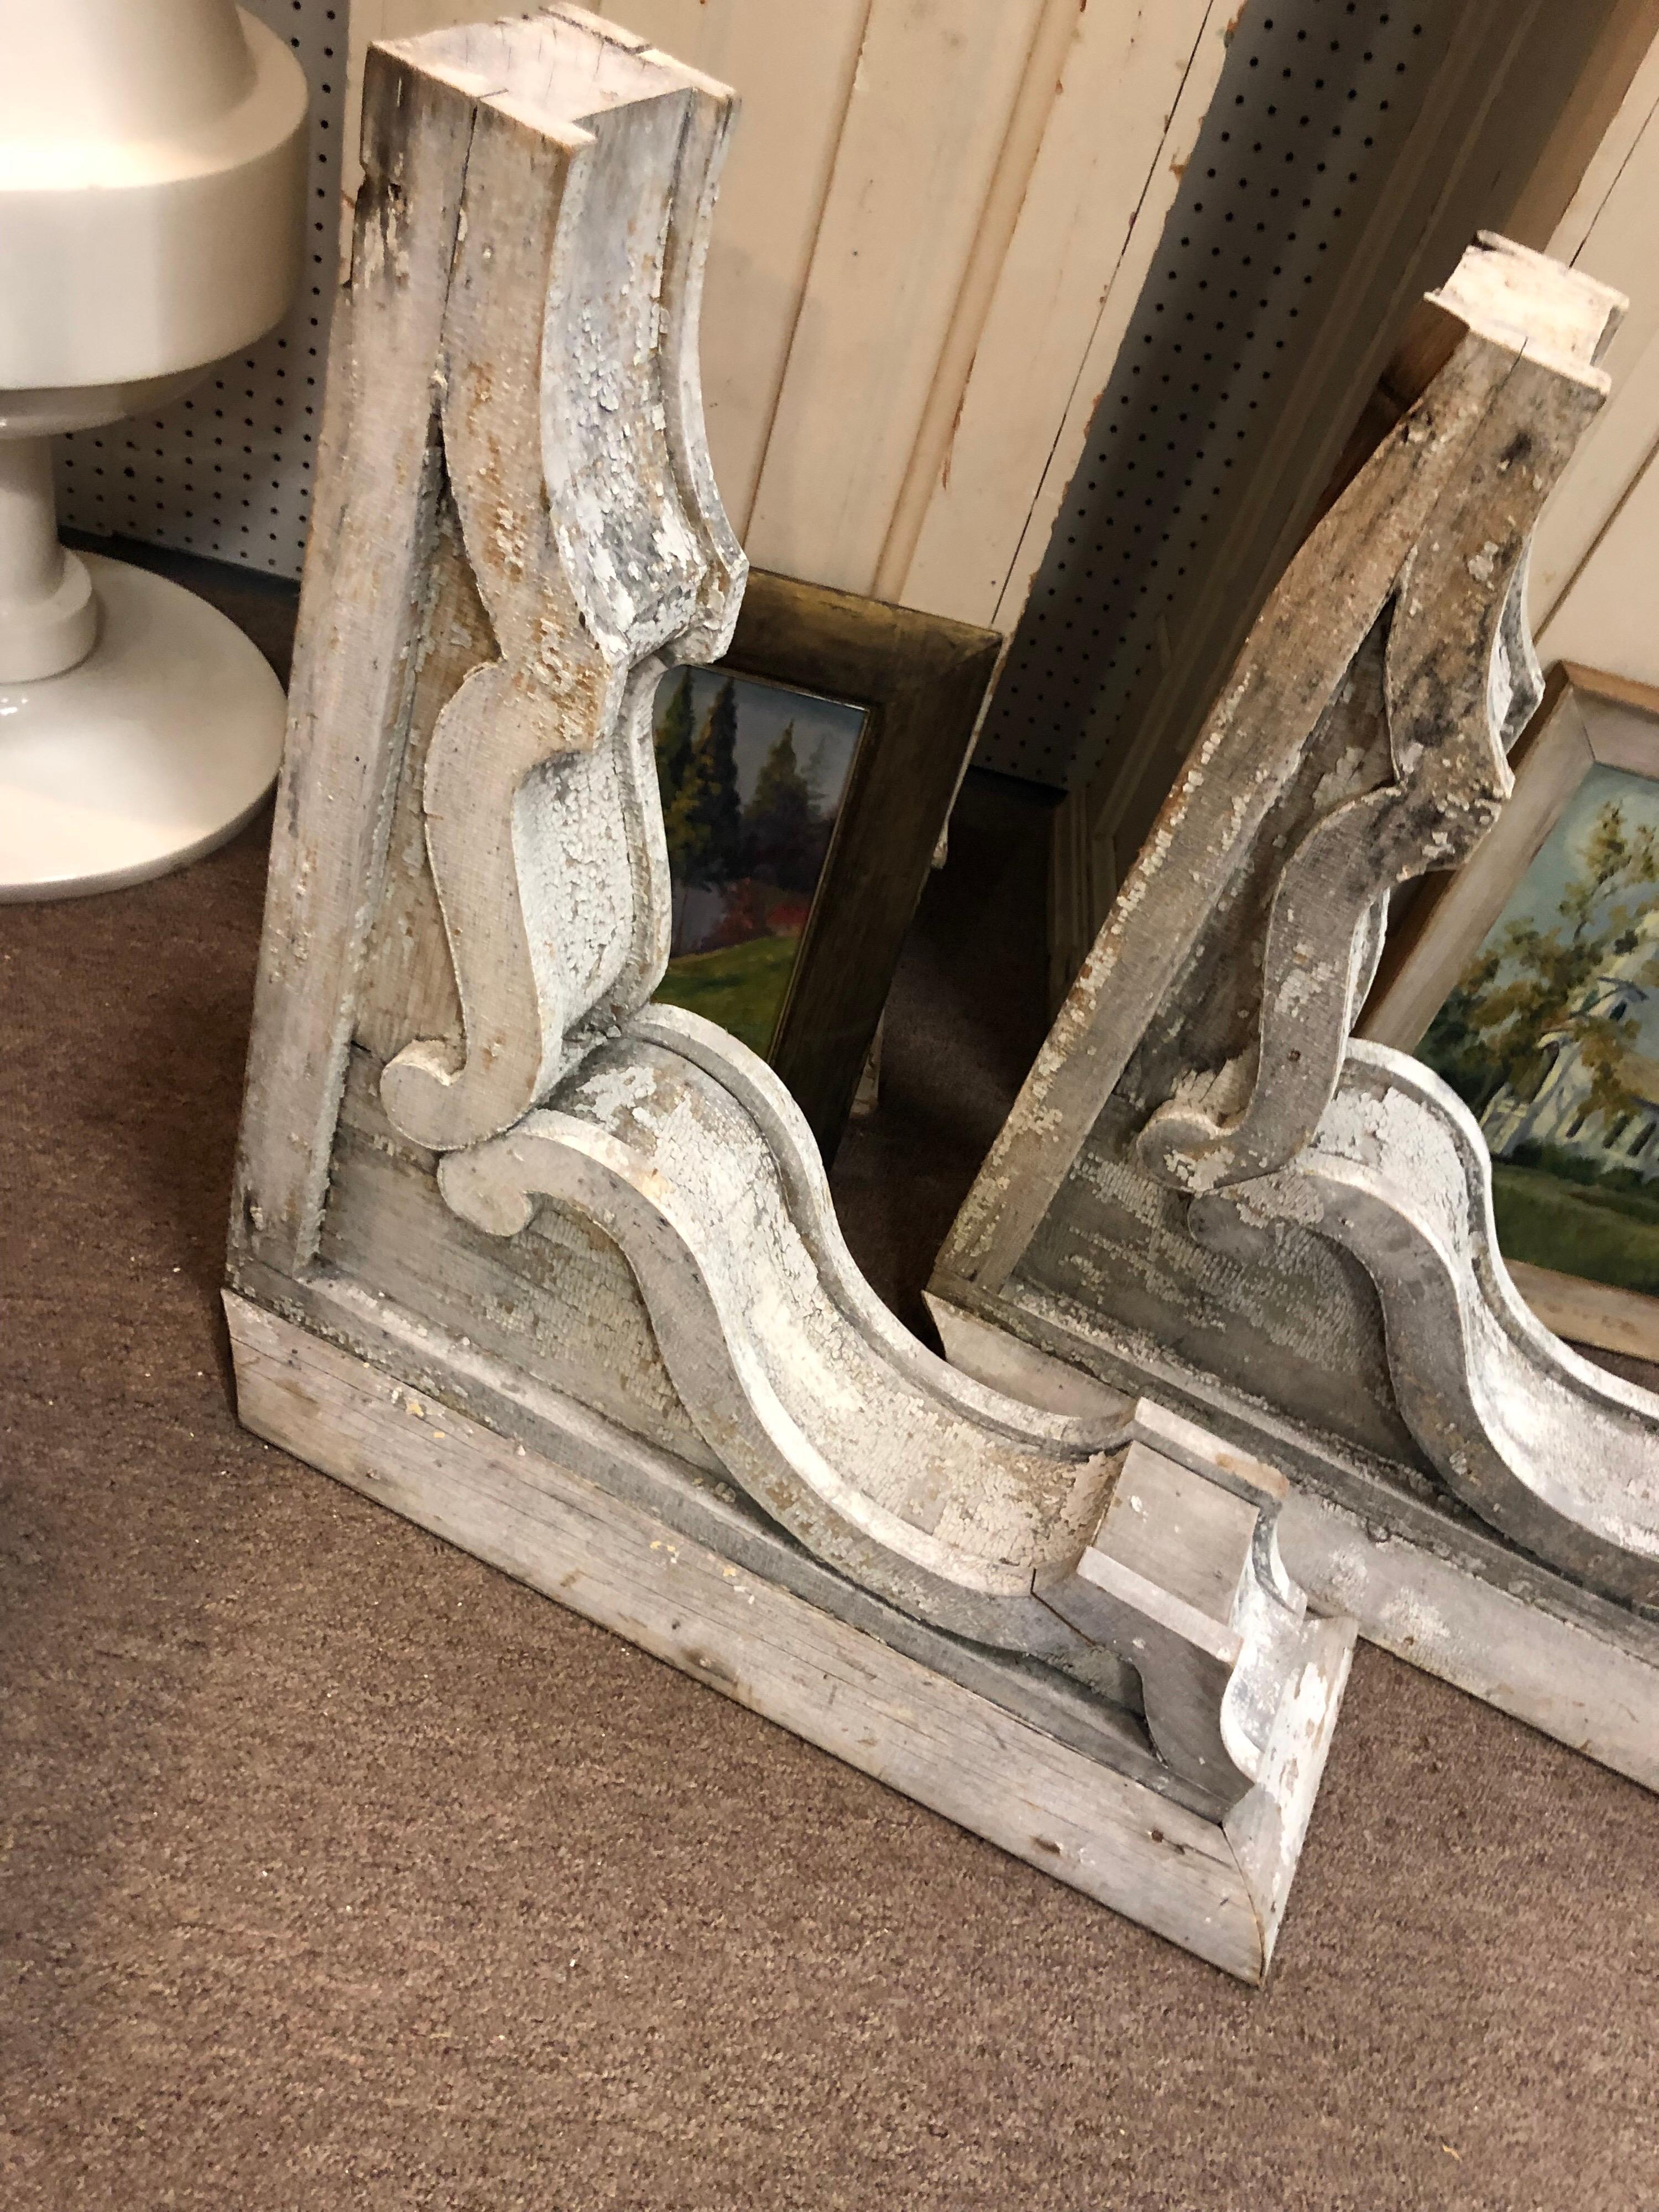 Pair of monumental antique farmhouse corbels. Chippy paint and faded whitewash color. Some seams are loose but can be reinforced. Use as ends to create a shelf or just mount as an architectural piece in your home. They came out of the Historic